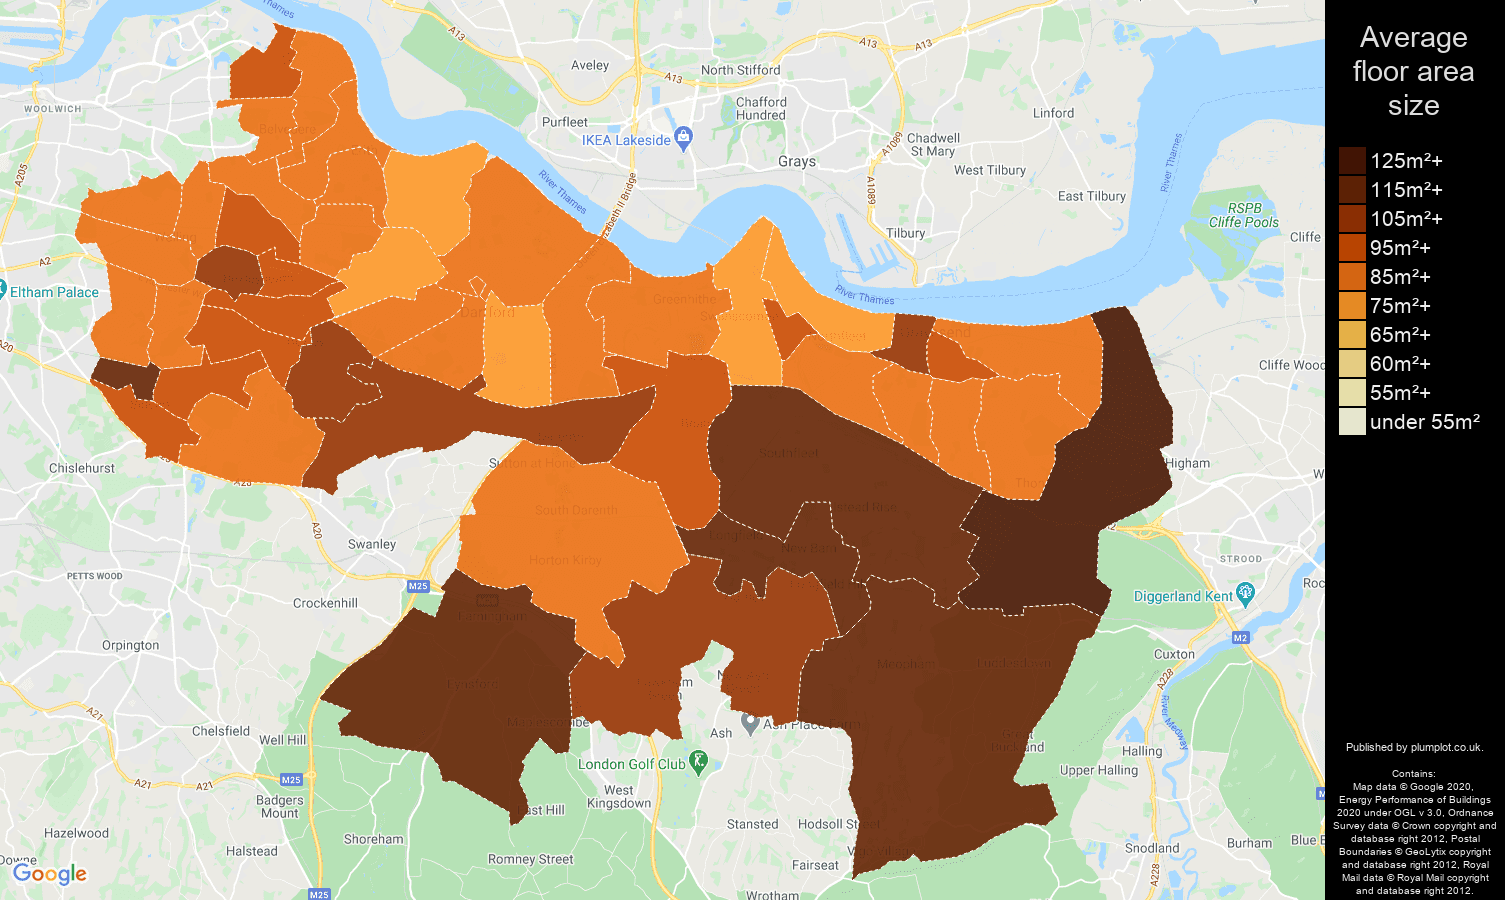 Dartford map of average floor area size of houses